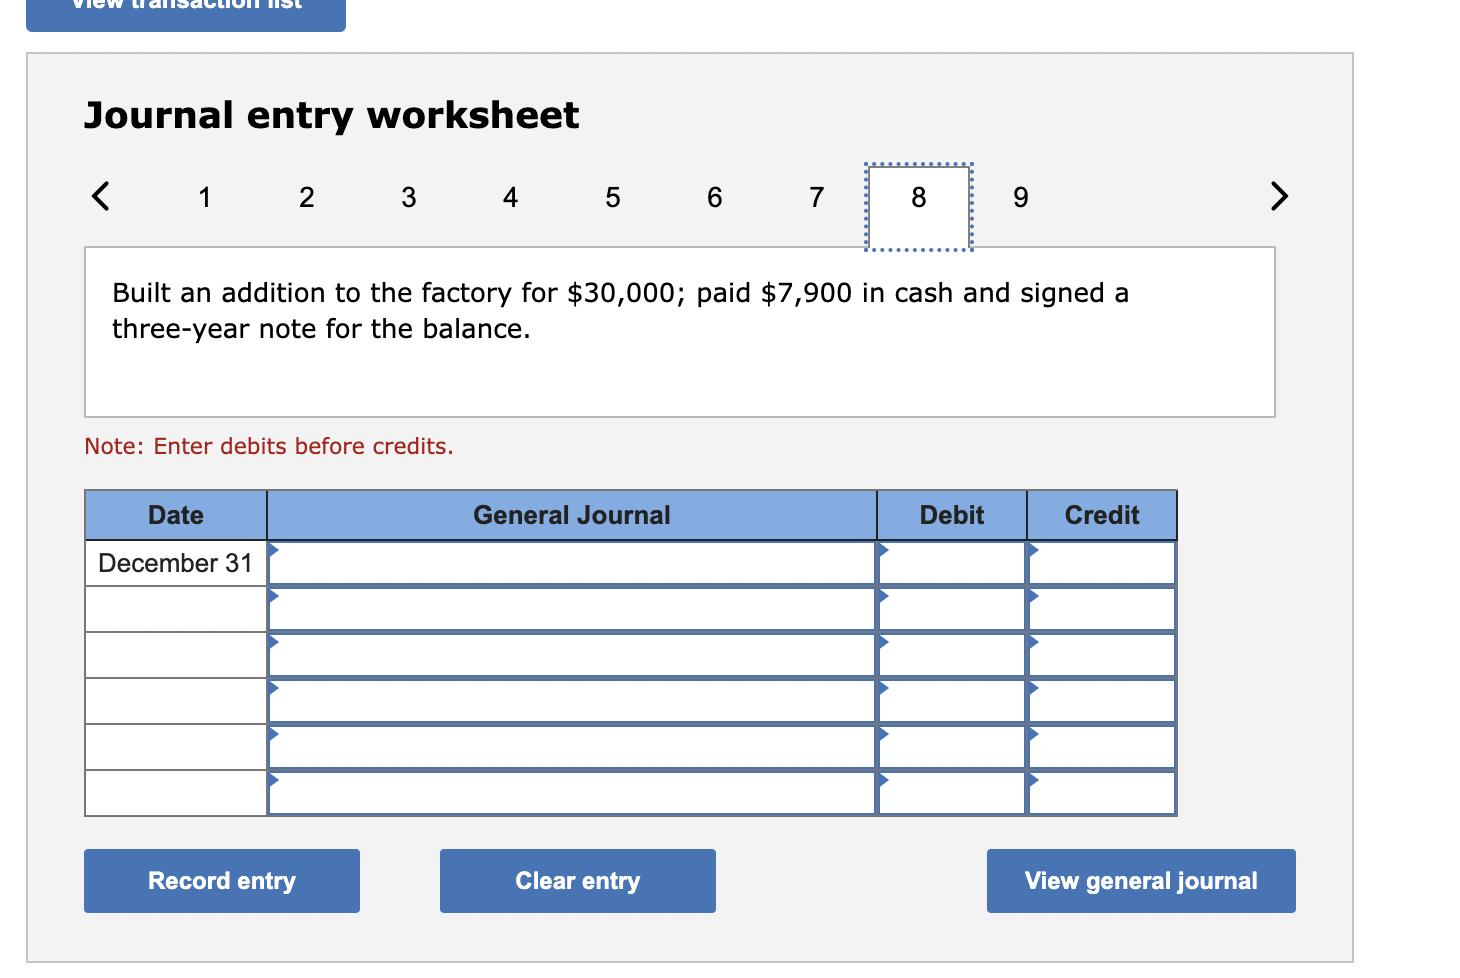 Journal entry worksheet 1Built an addition to the factory for ( $ 30,000 ); paid ( $ 7,900 ) in cash and signed a thre